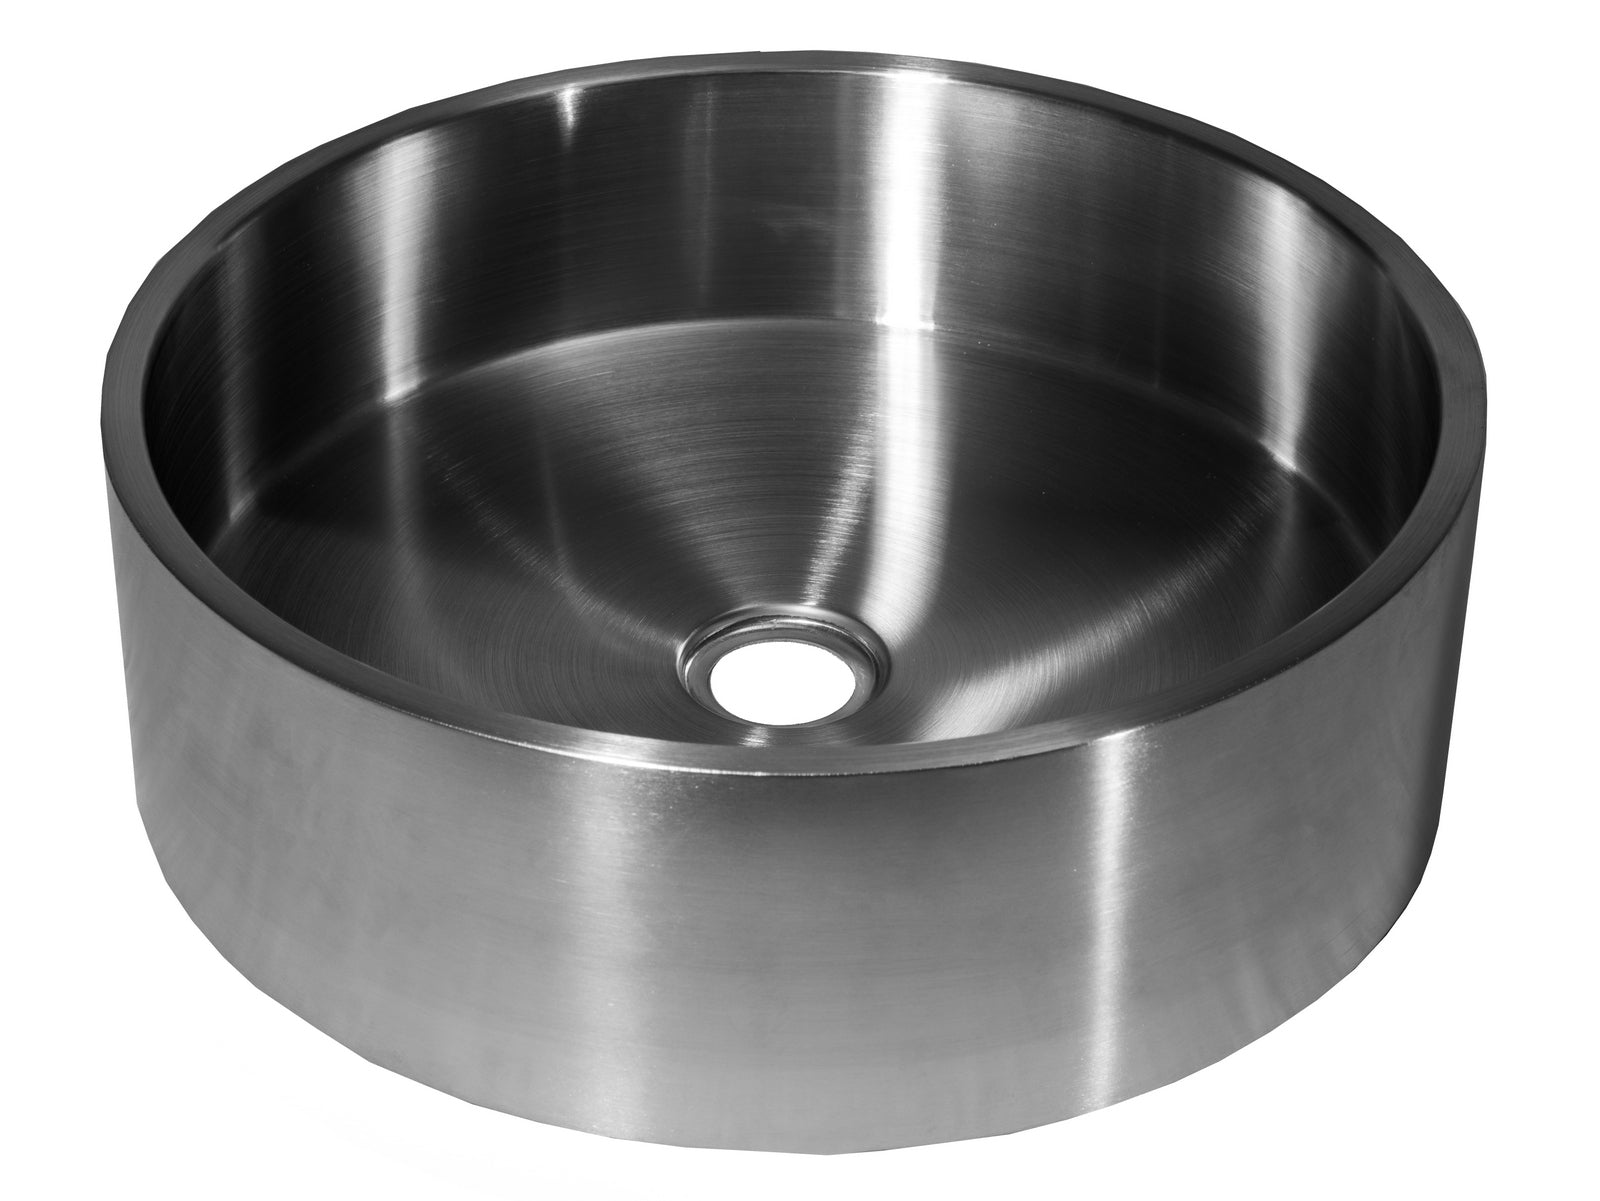 15 3/4" Round Thick Rim Stainless Steel Bathroom Vessel Sink with Drain in Silver